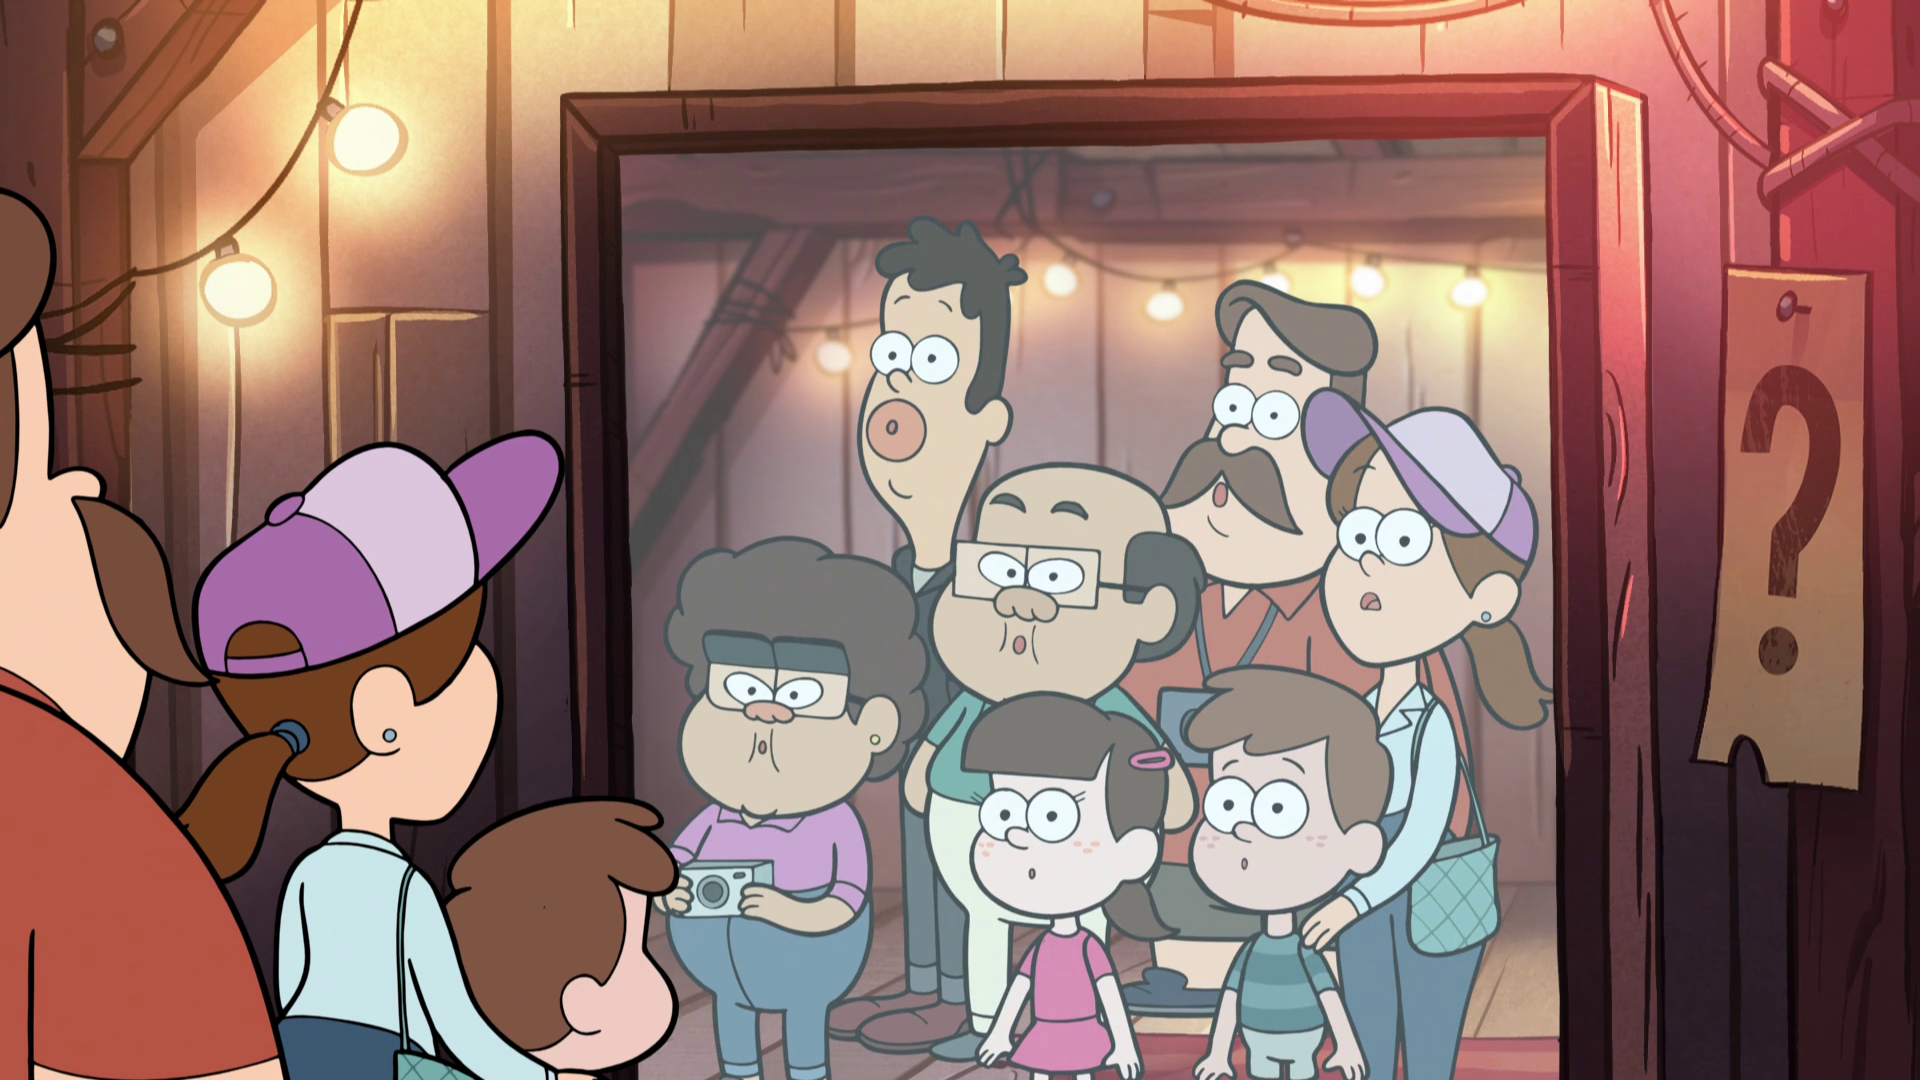 https://static.wikia.nocookie.net/gravityfalls/images/c/c8/S1e18_mirror.png/revision/latest?cb=20130622193601